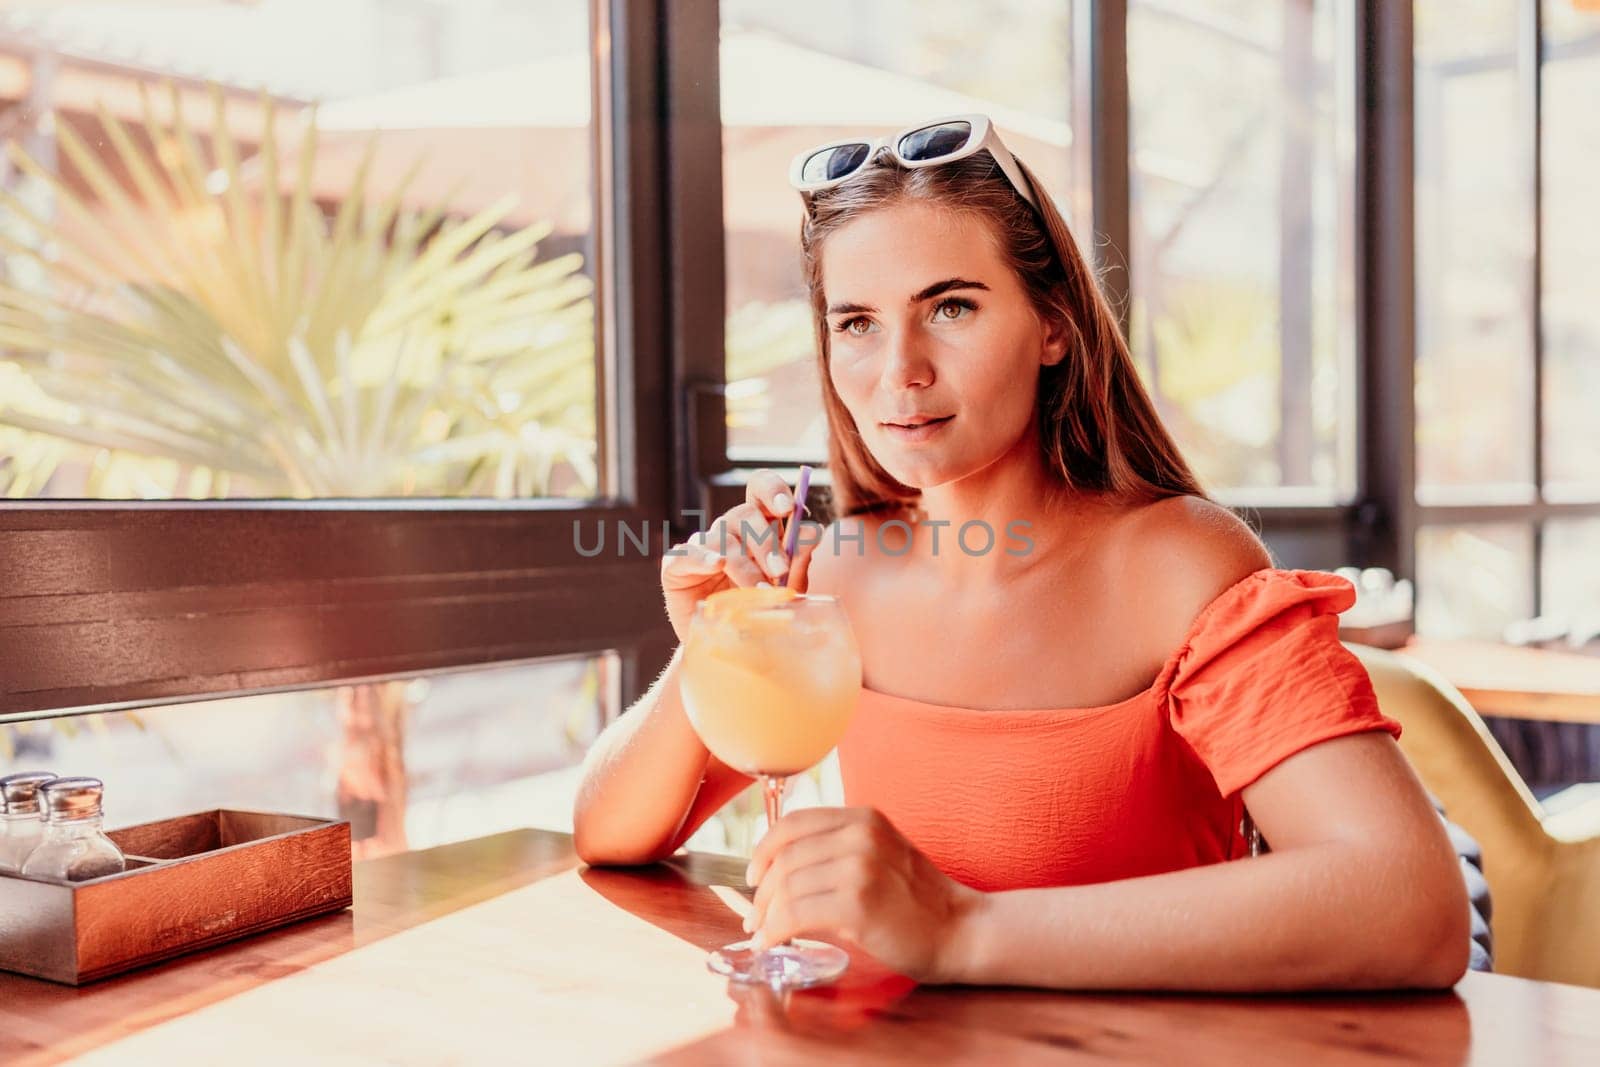 woman in a cafe seated, holding beverage. Dressed in an orange dress with her hair down. Bright interior, large windows allow natural light. Beverage consumption for refreshment. by Matiunina